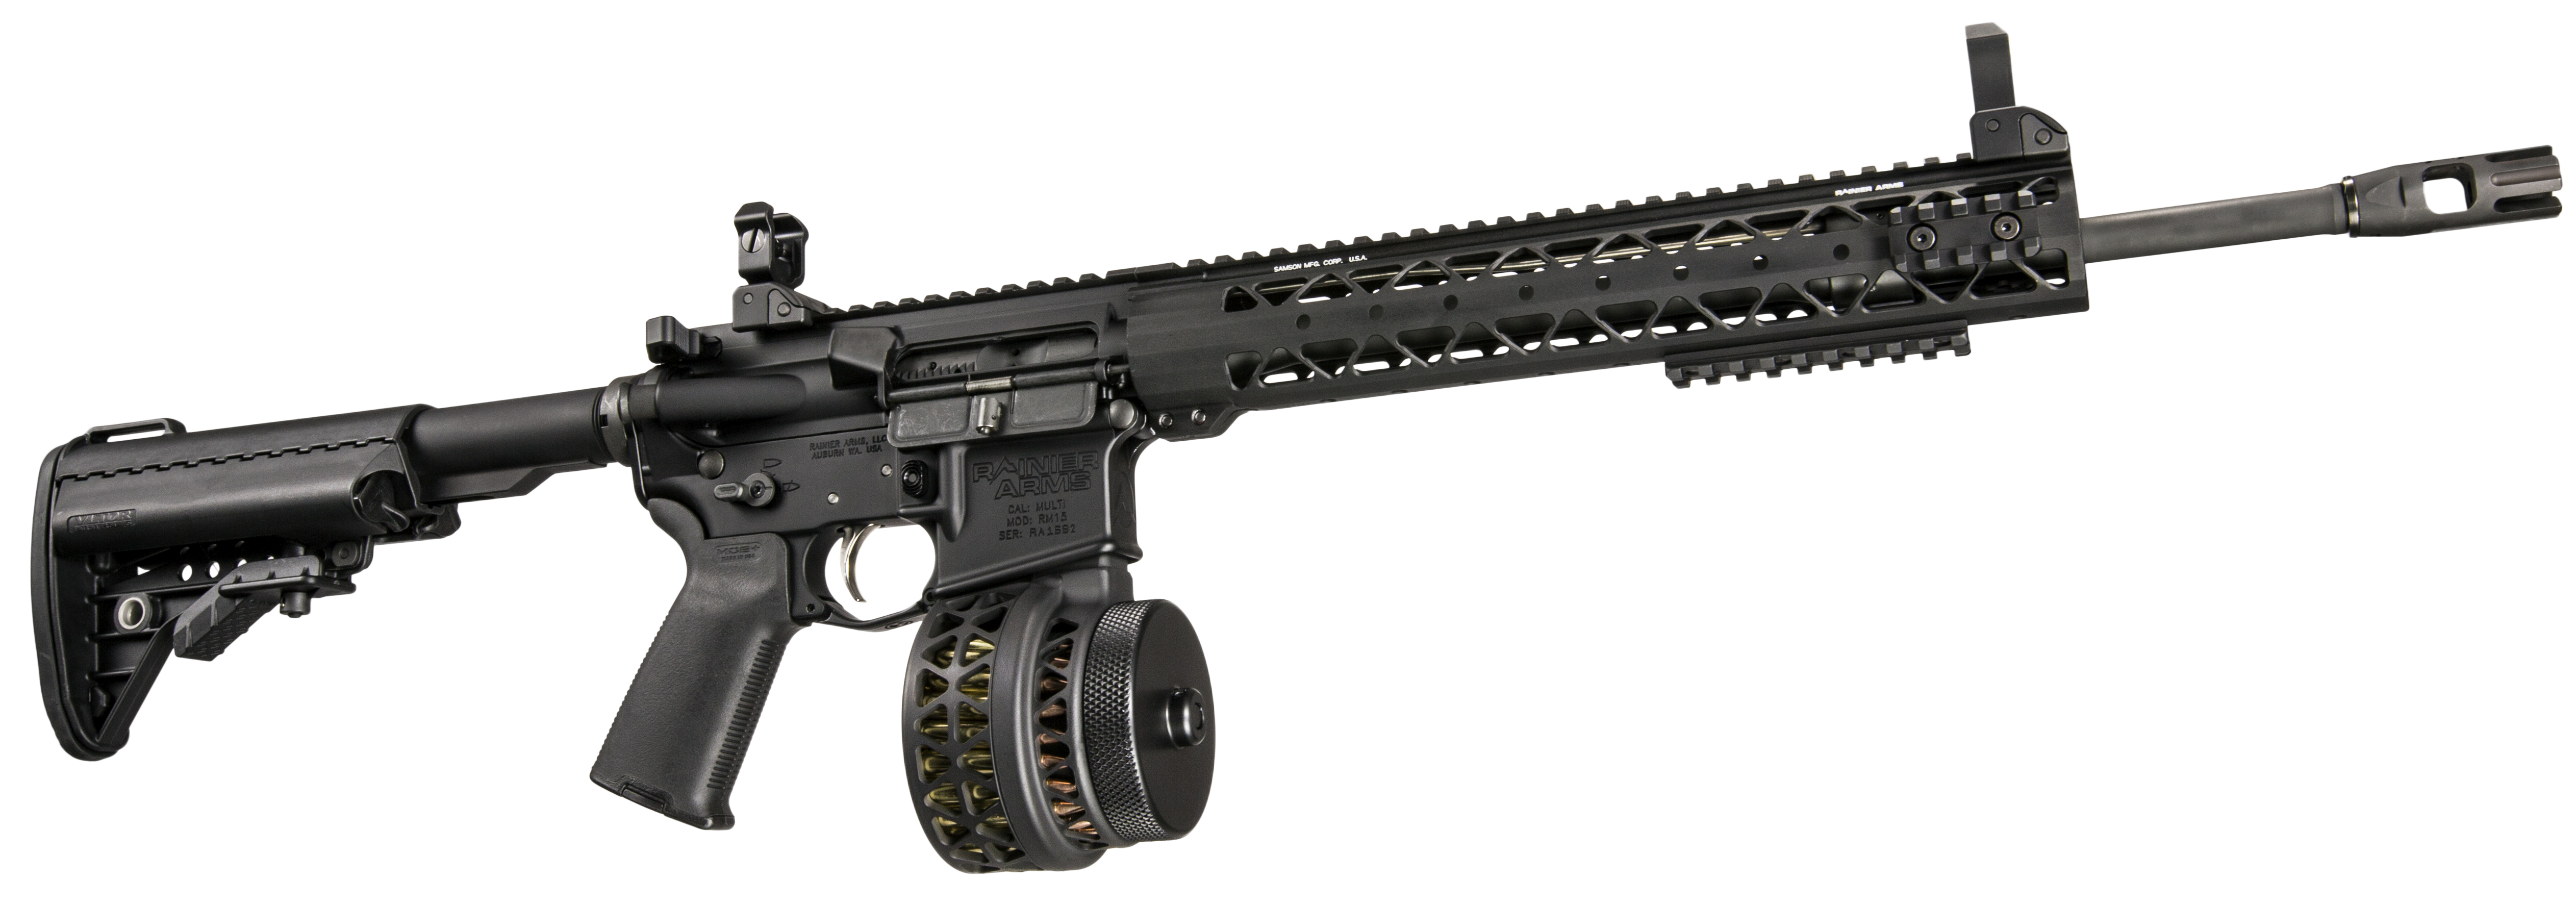 Pictured above is an AR-15 derivative with a 50 round drum magazine. 